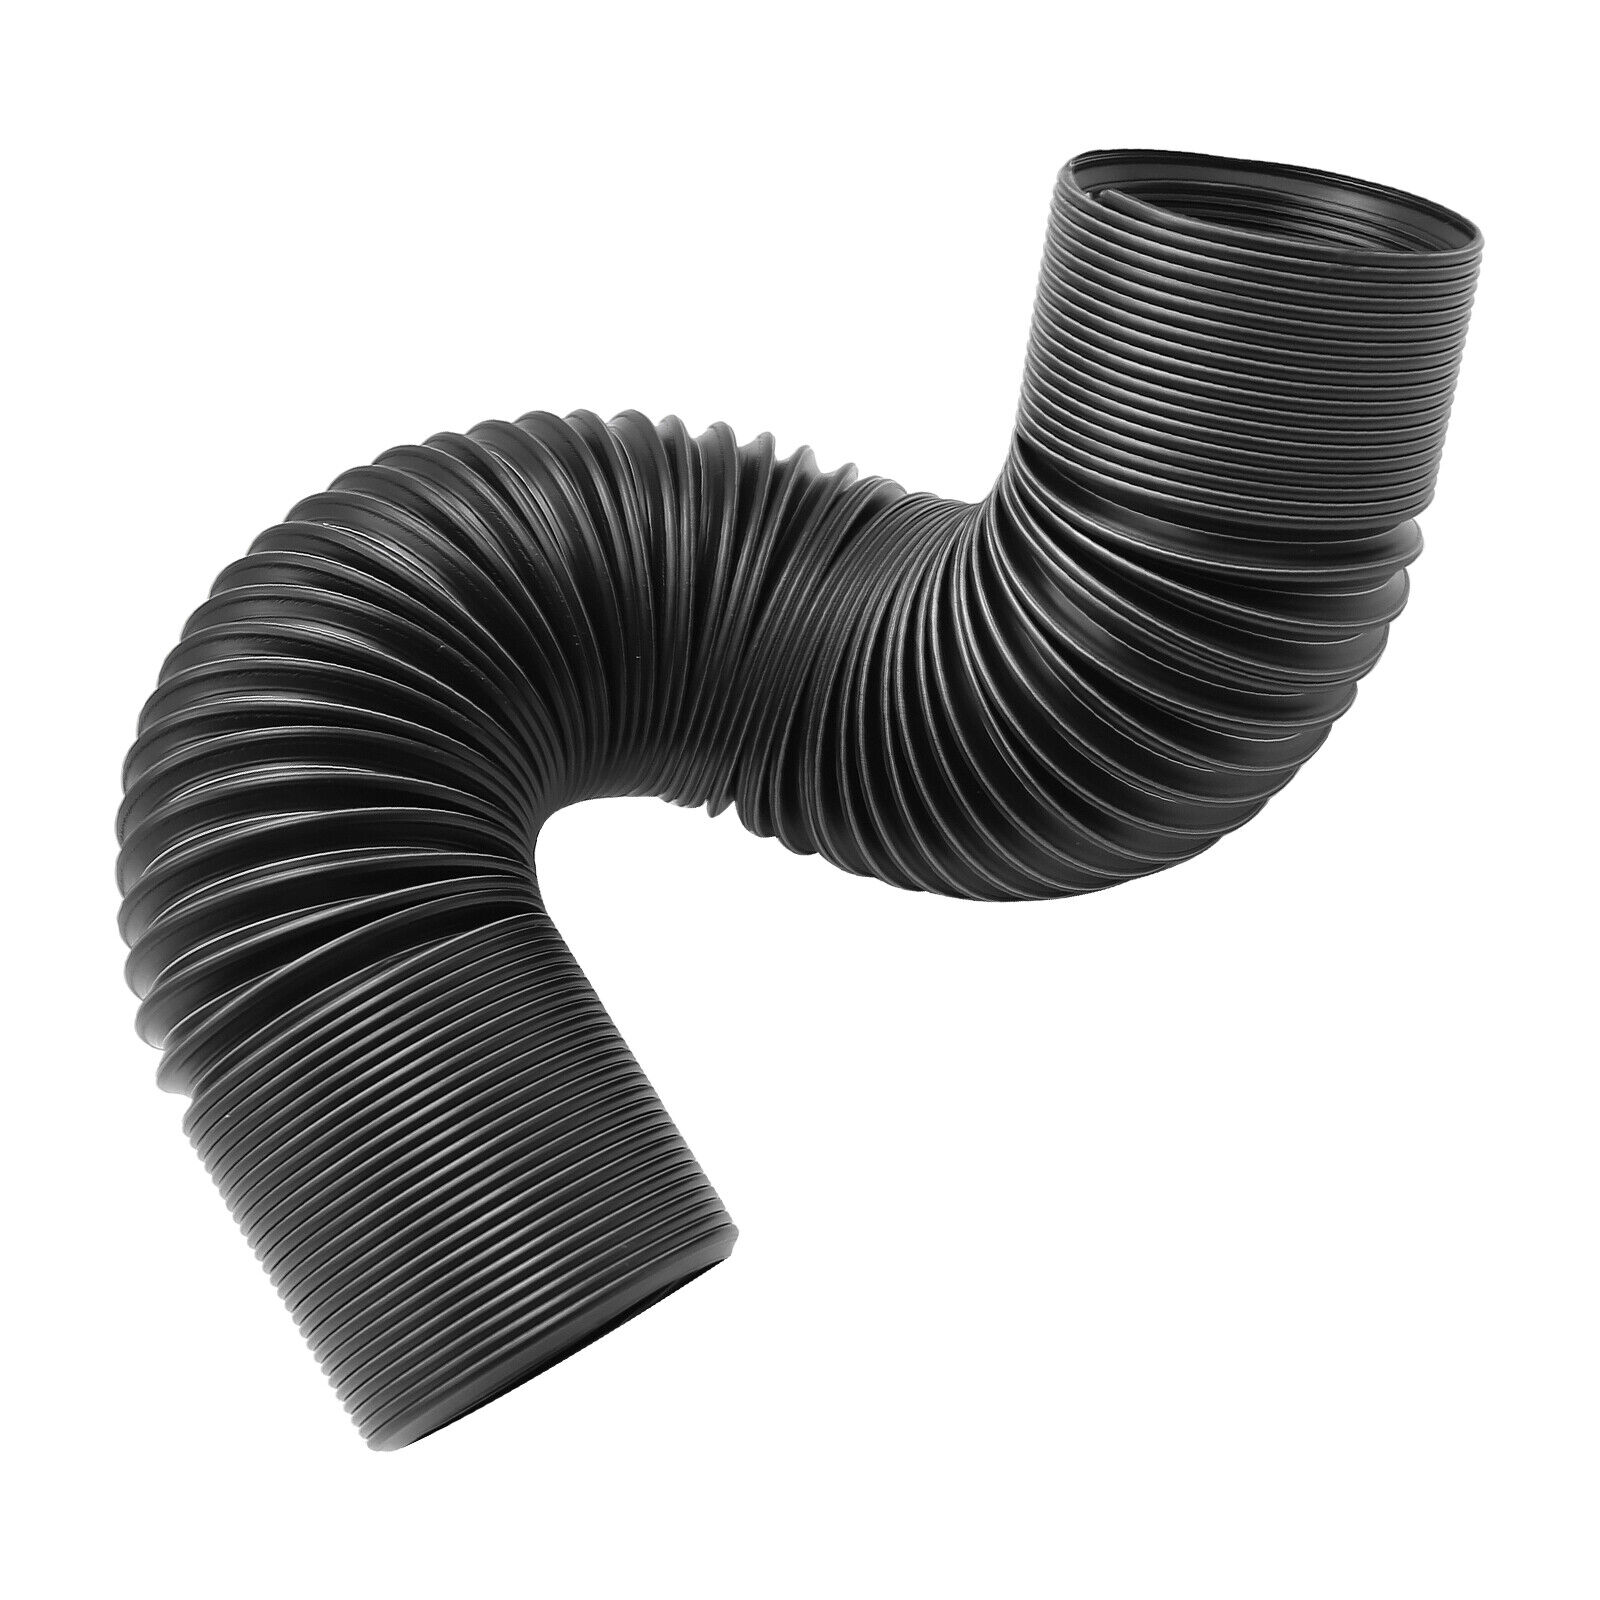 3 inch Adjustable Cold Air Intake System Hose Pipe Multi-Flexible for Car Turbo